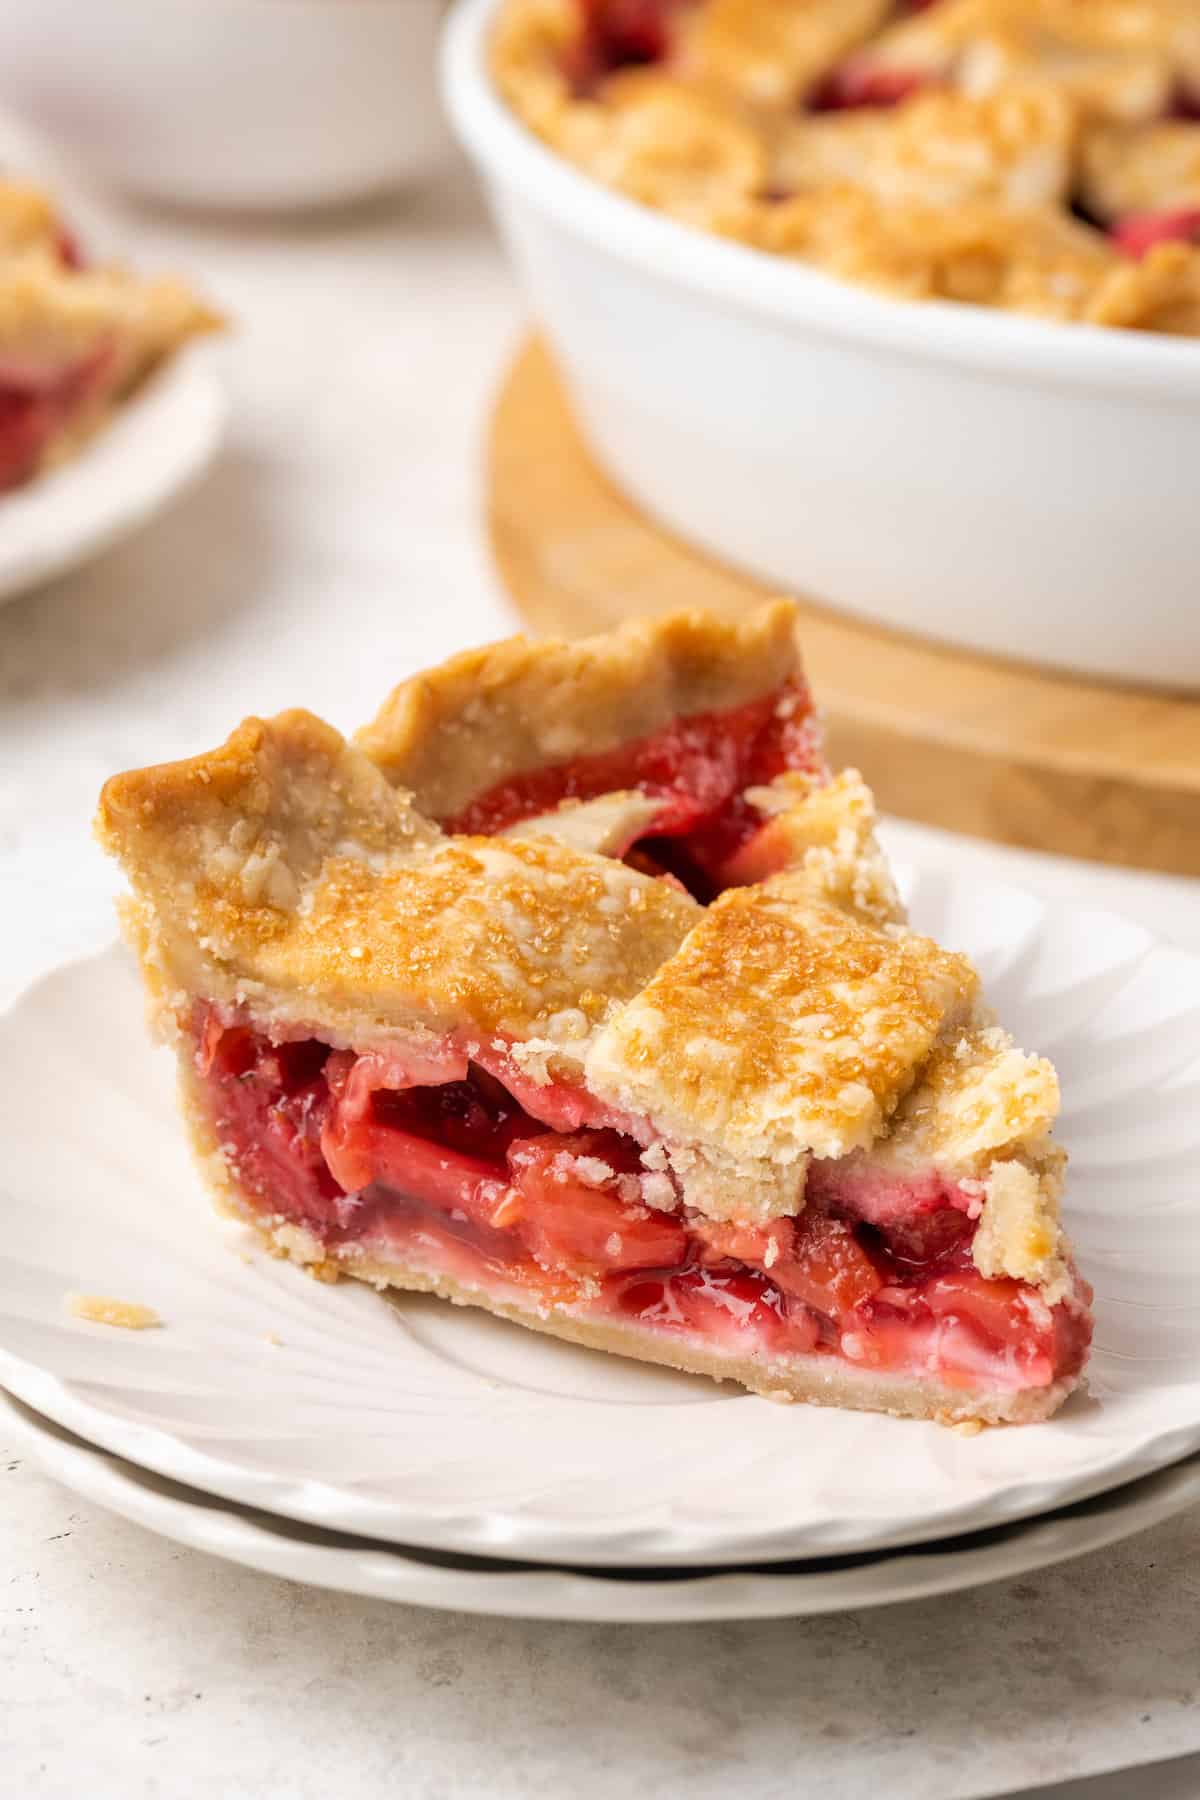 A slice of strawberry rhubarb pie on a white plate.